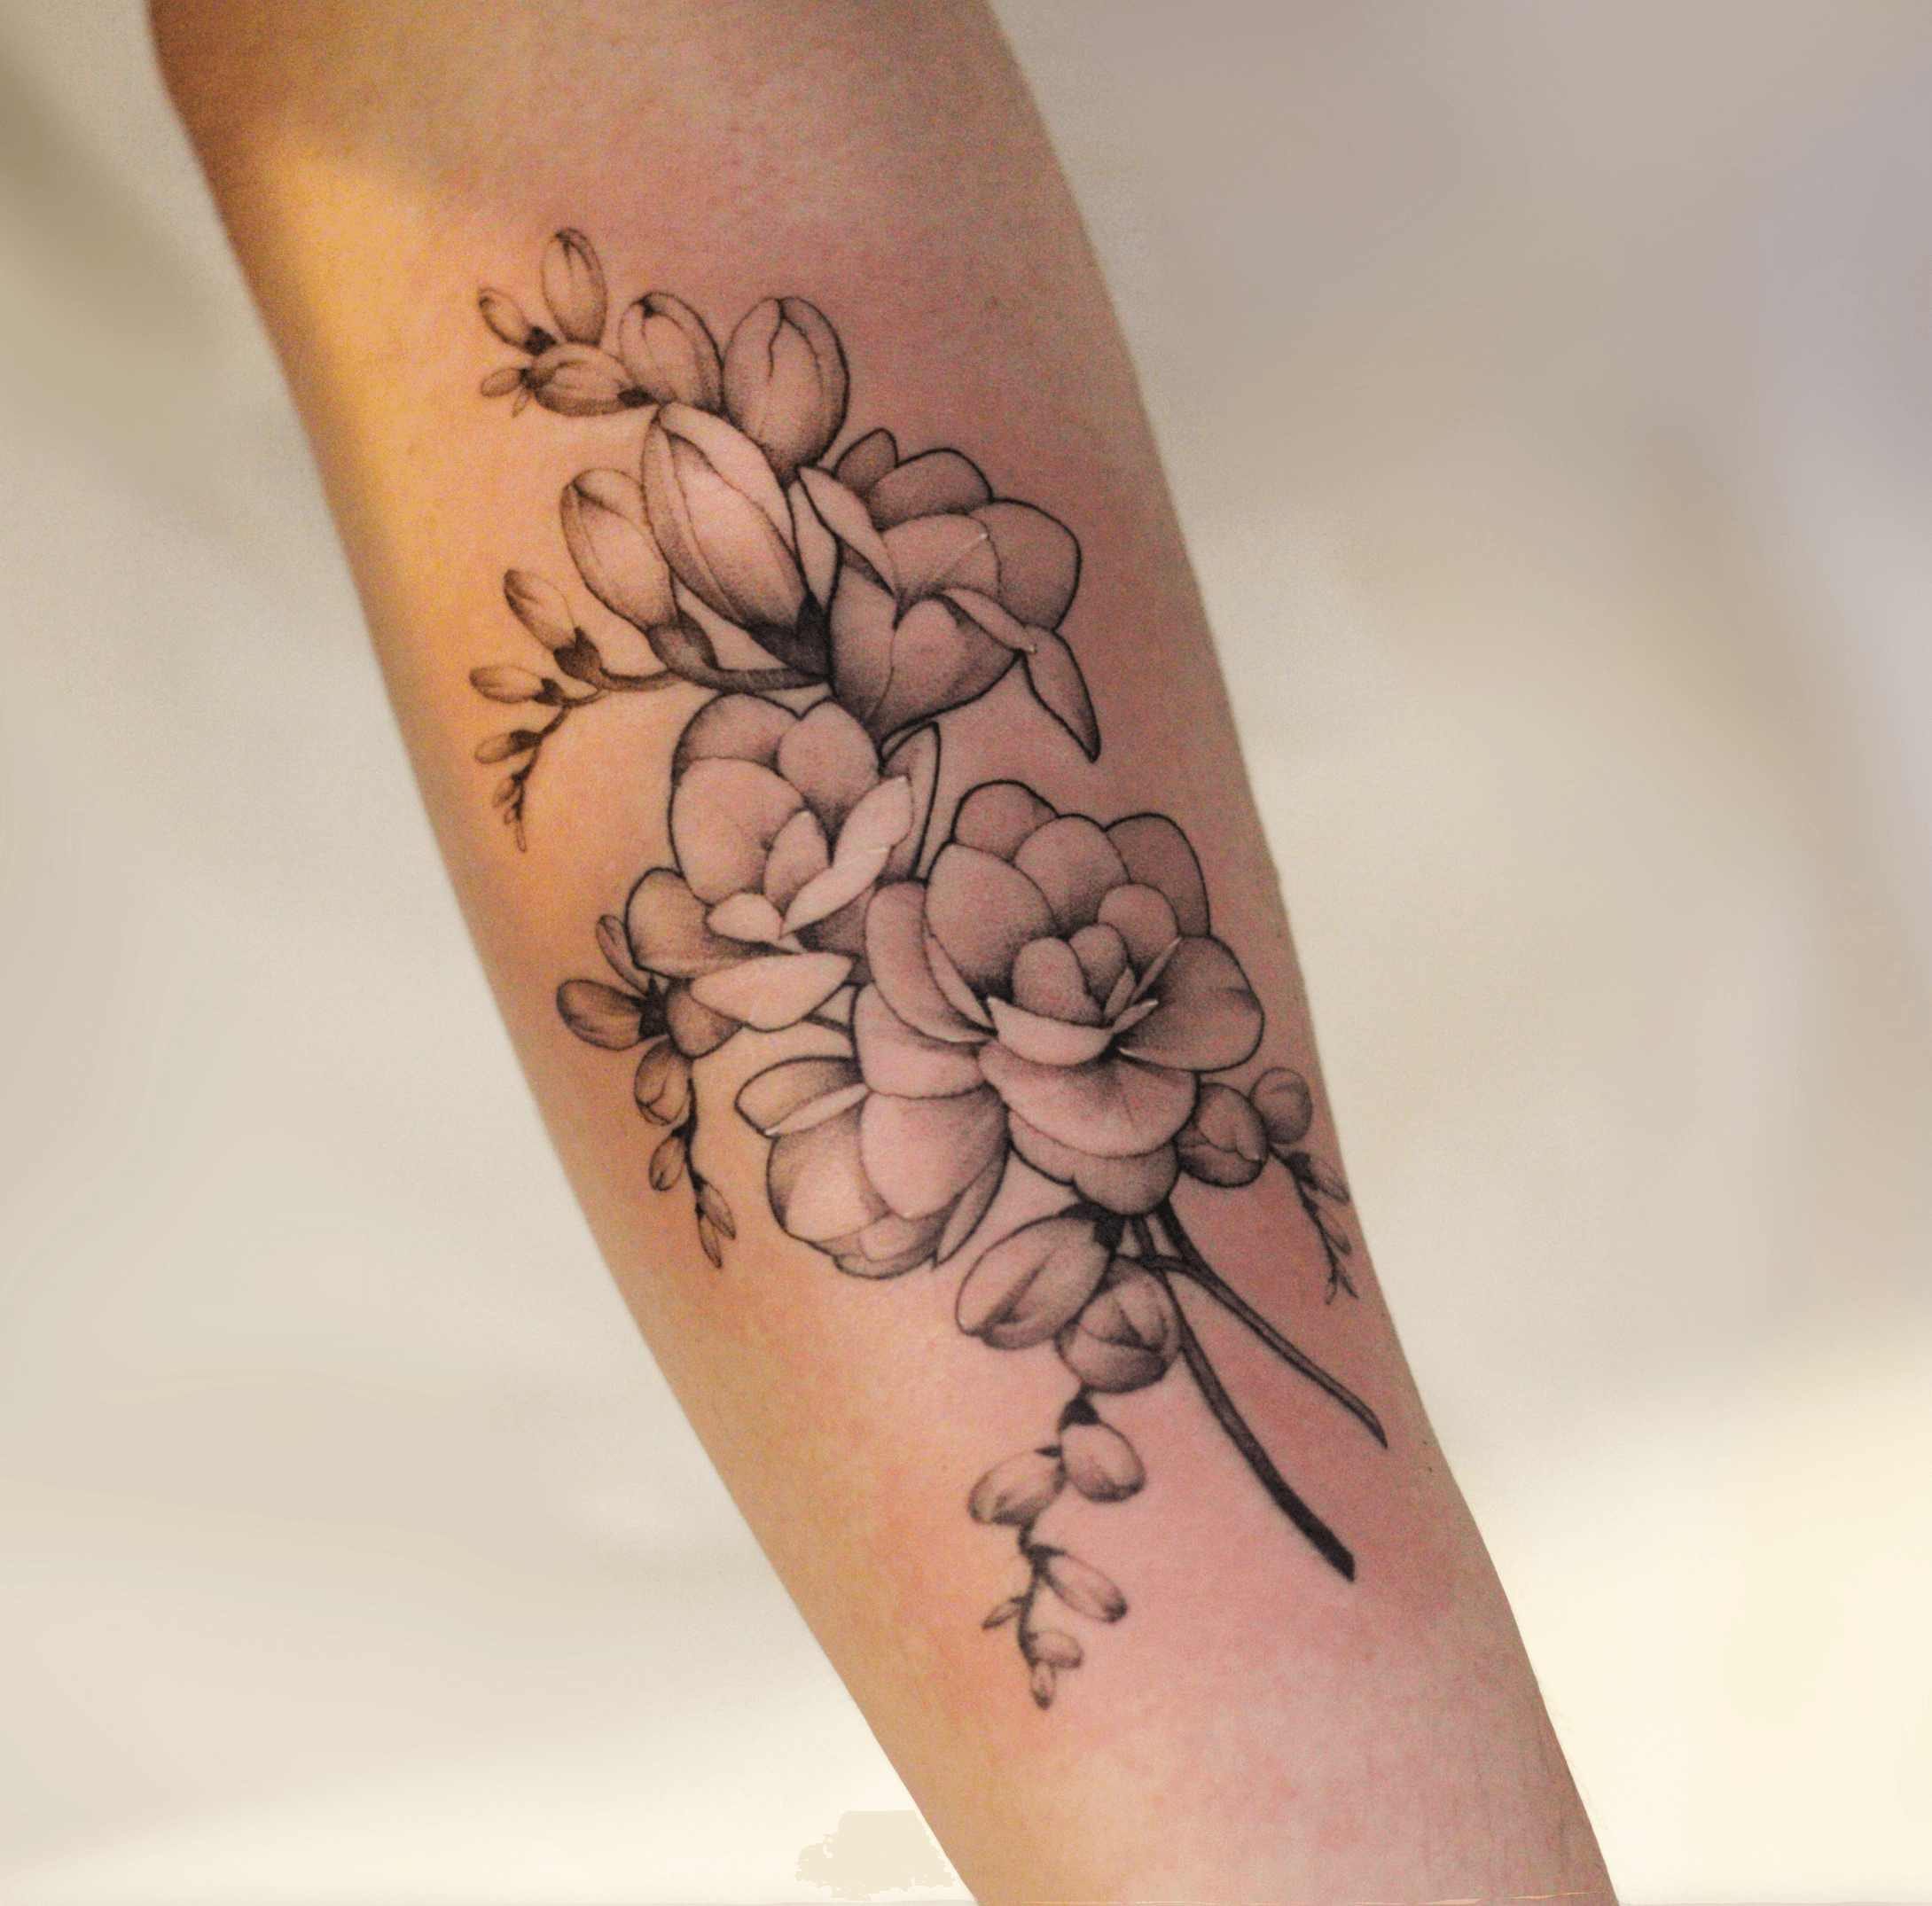 65 SwoonWorthy Tattoo Designs Every Girl Will Fall In Love With   TattooBlend